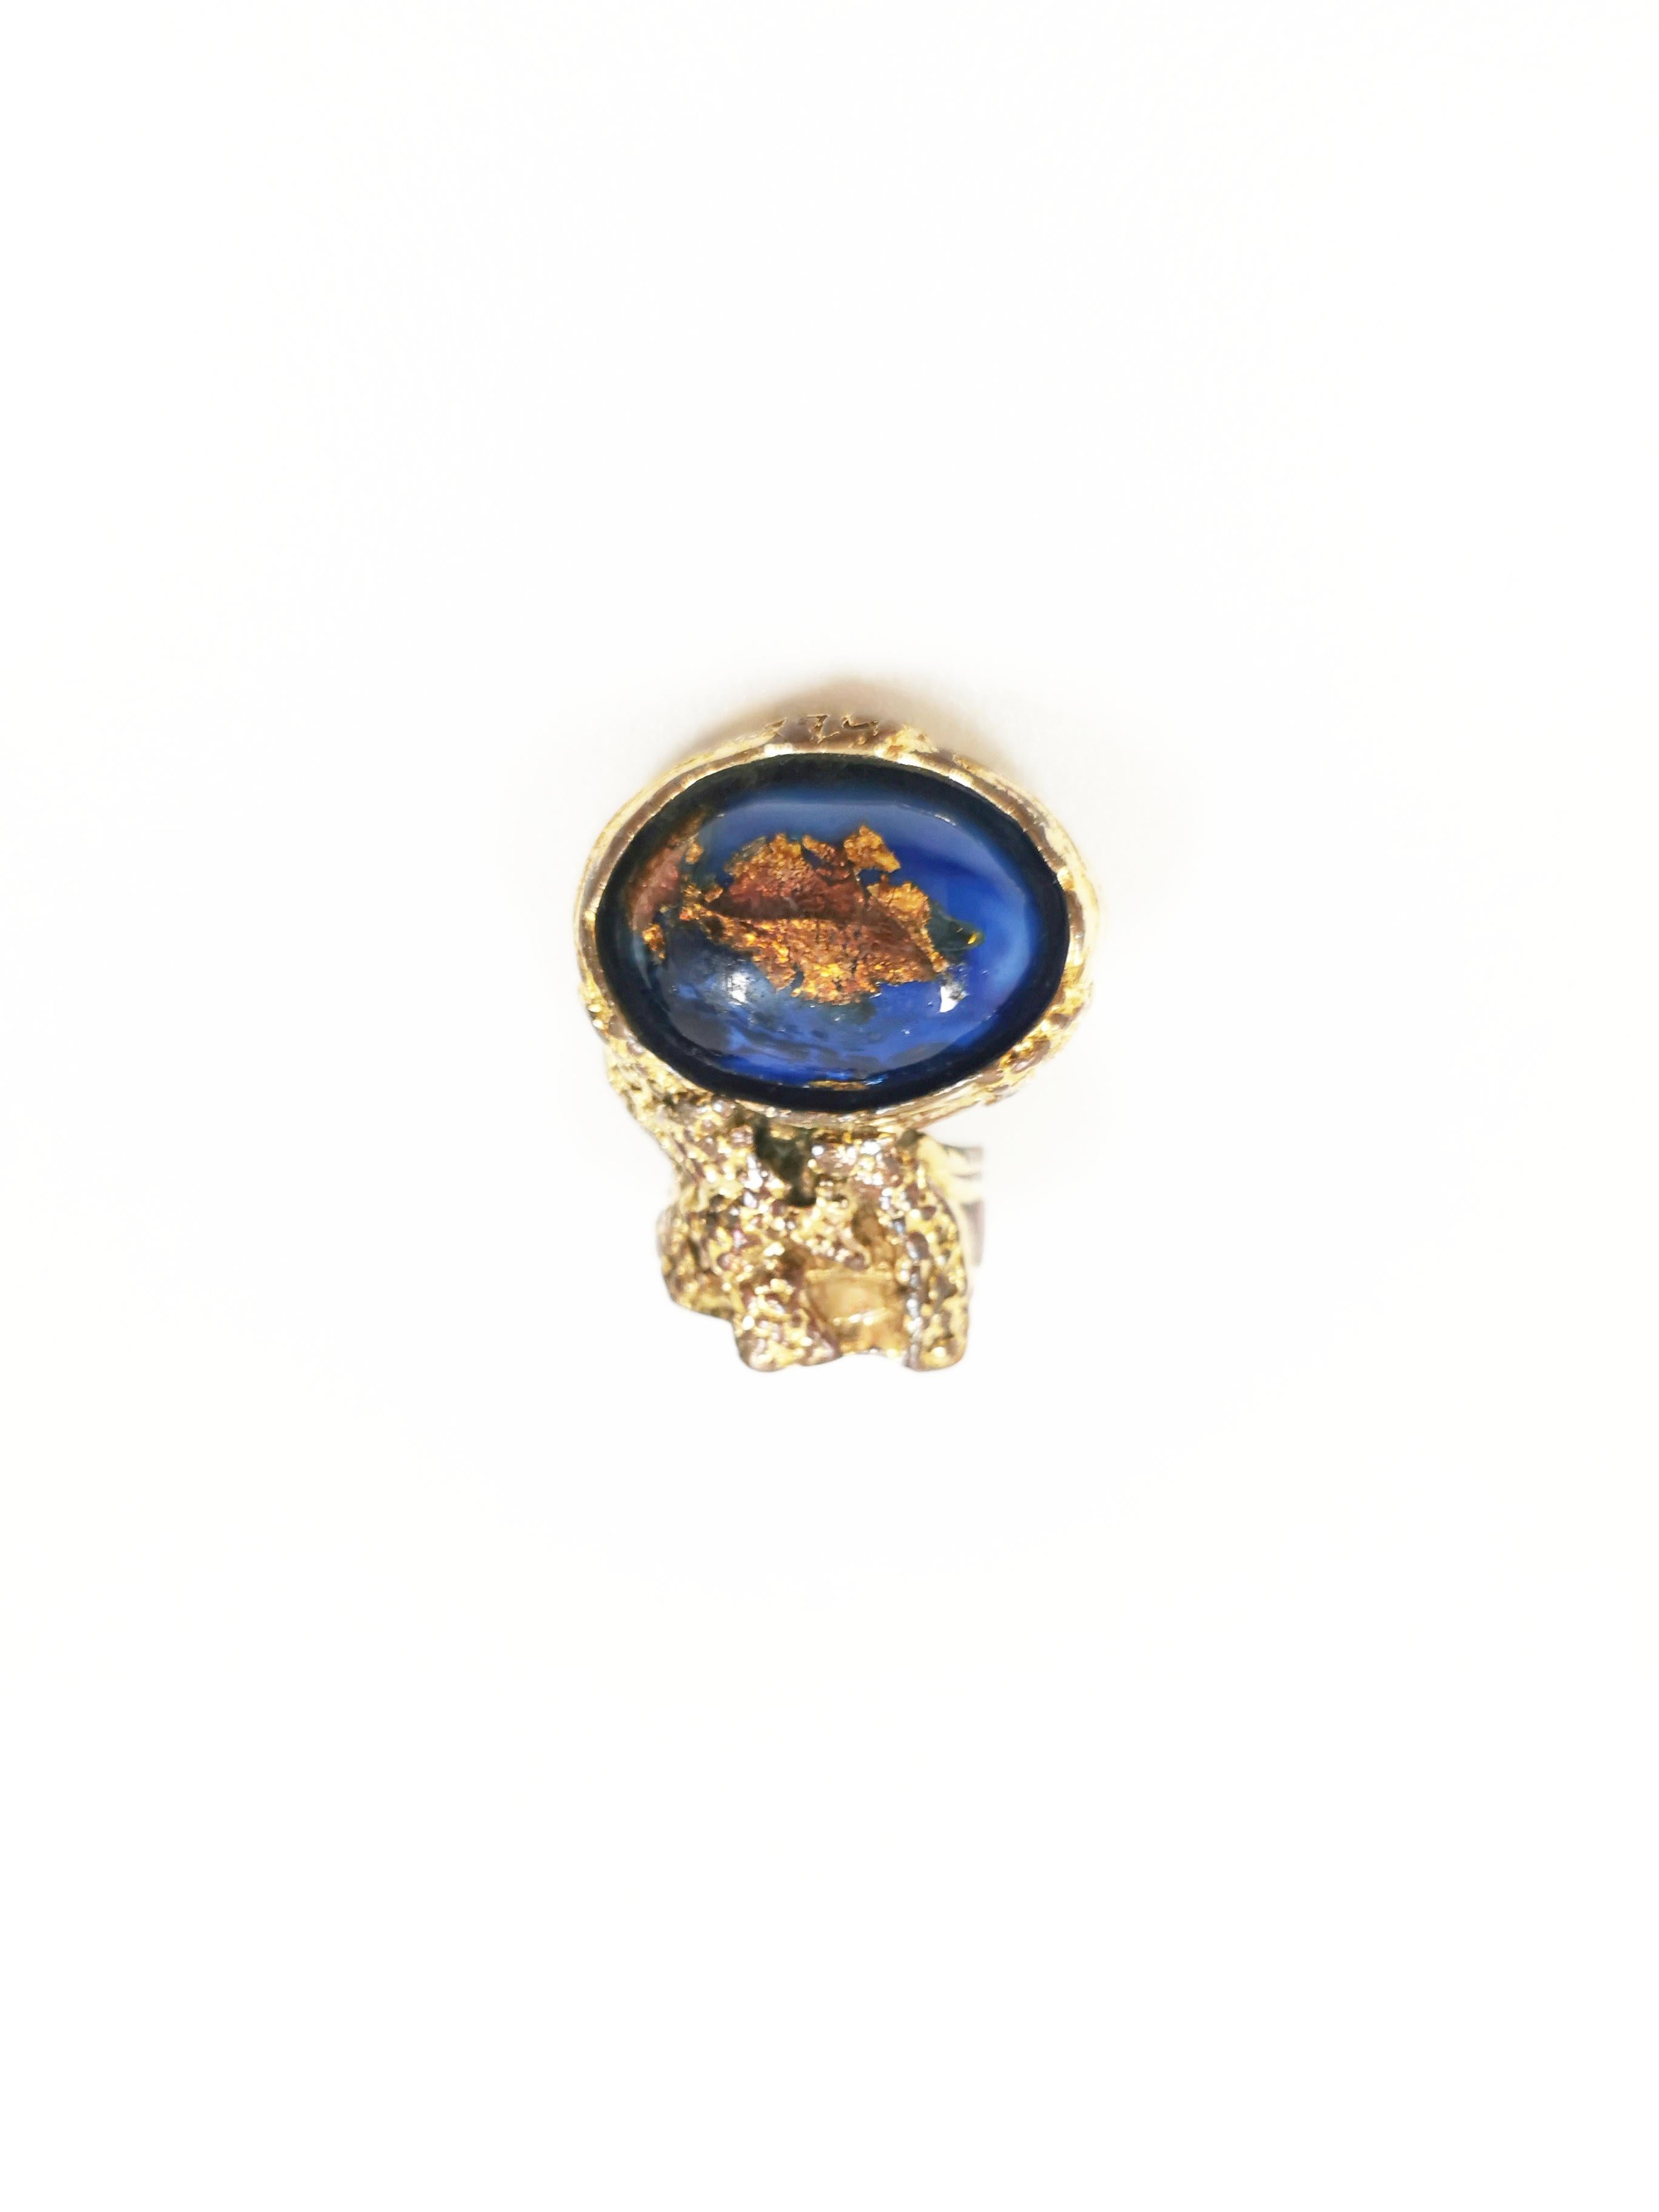 The YSL (Yves Saint Laurent) Arty Ring, also known as the YSL Arty Ovale Ring, is a popular and iconic fashion accessory that was available in a variety of colors and materials. This ring was known for its large, bold design and featured a large,